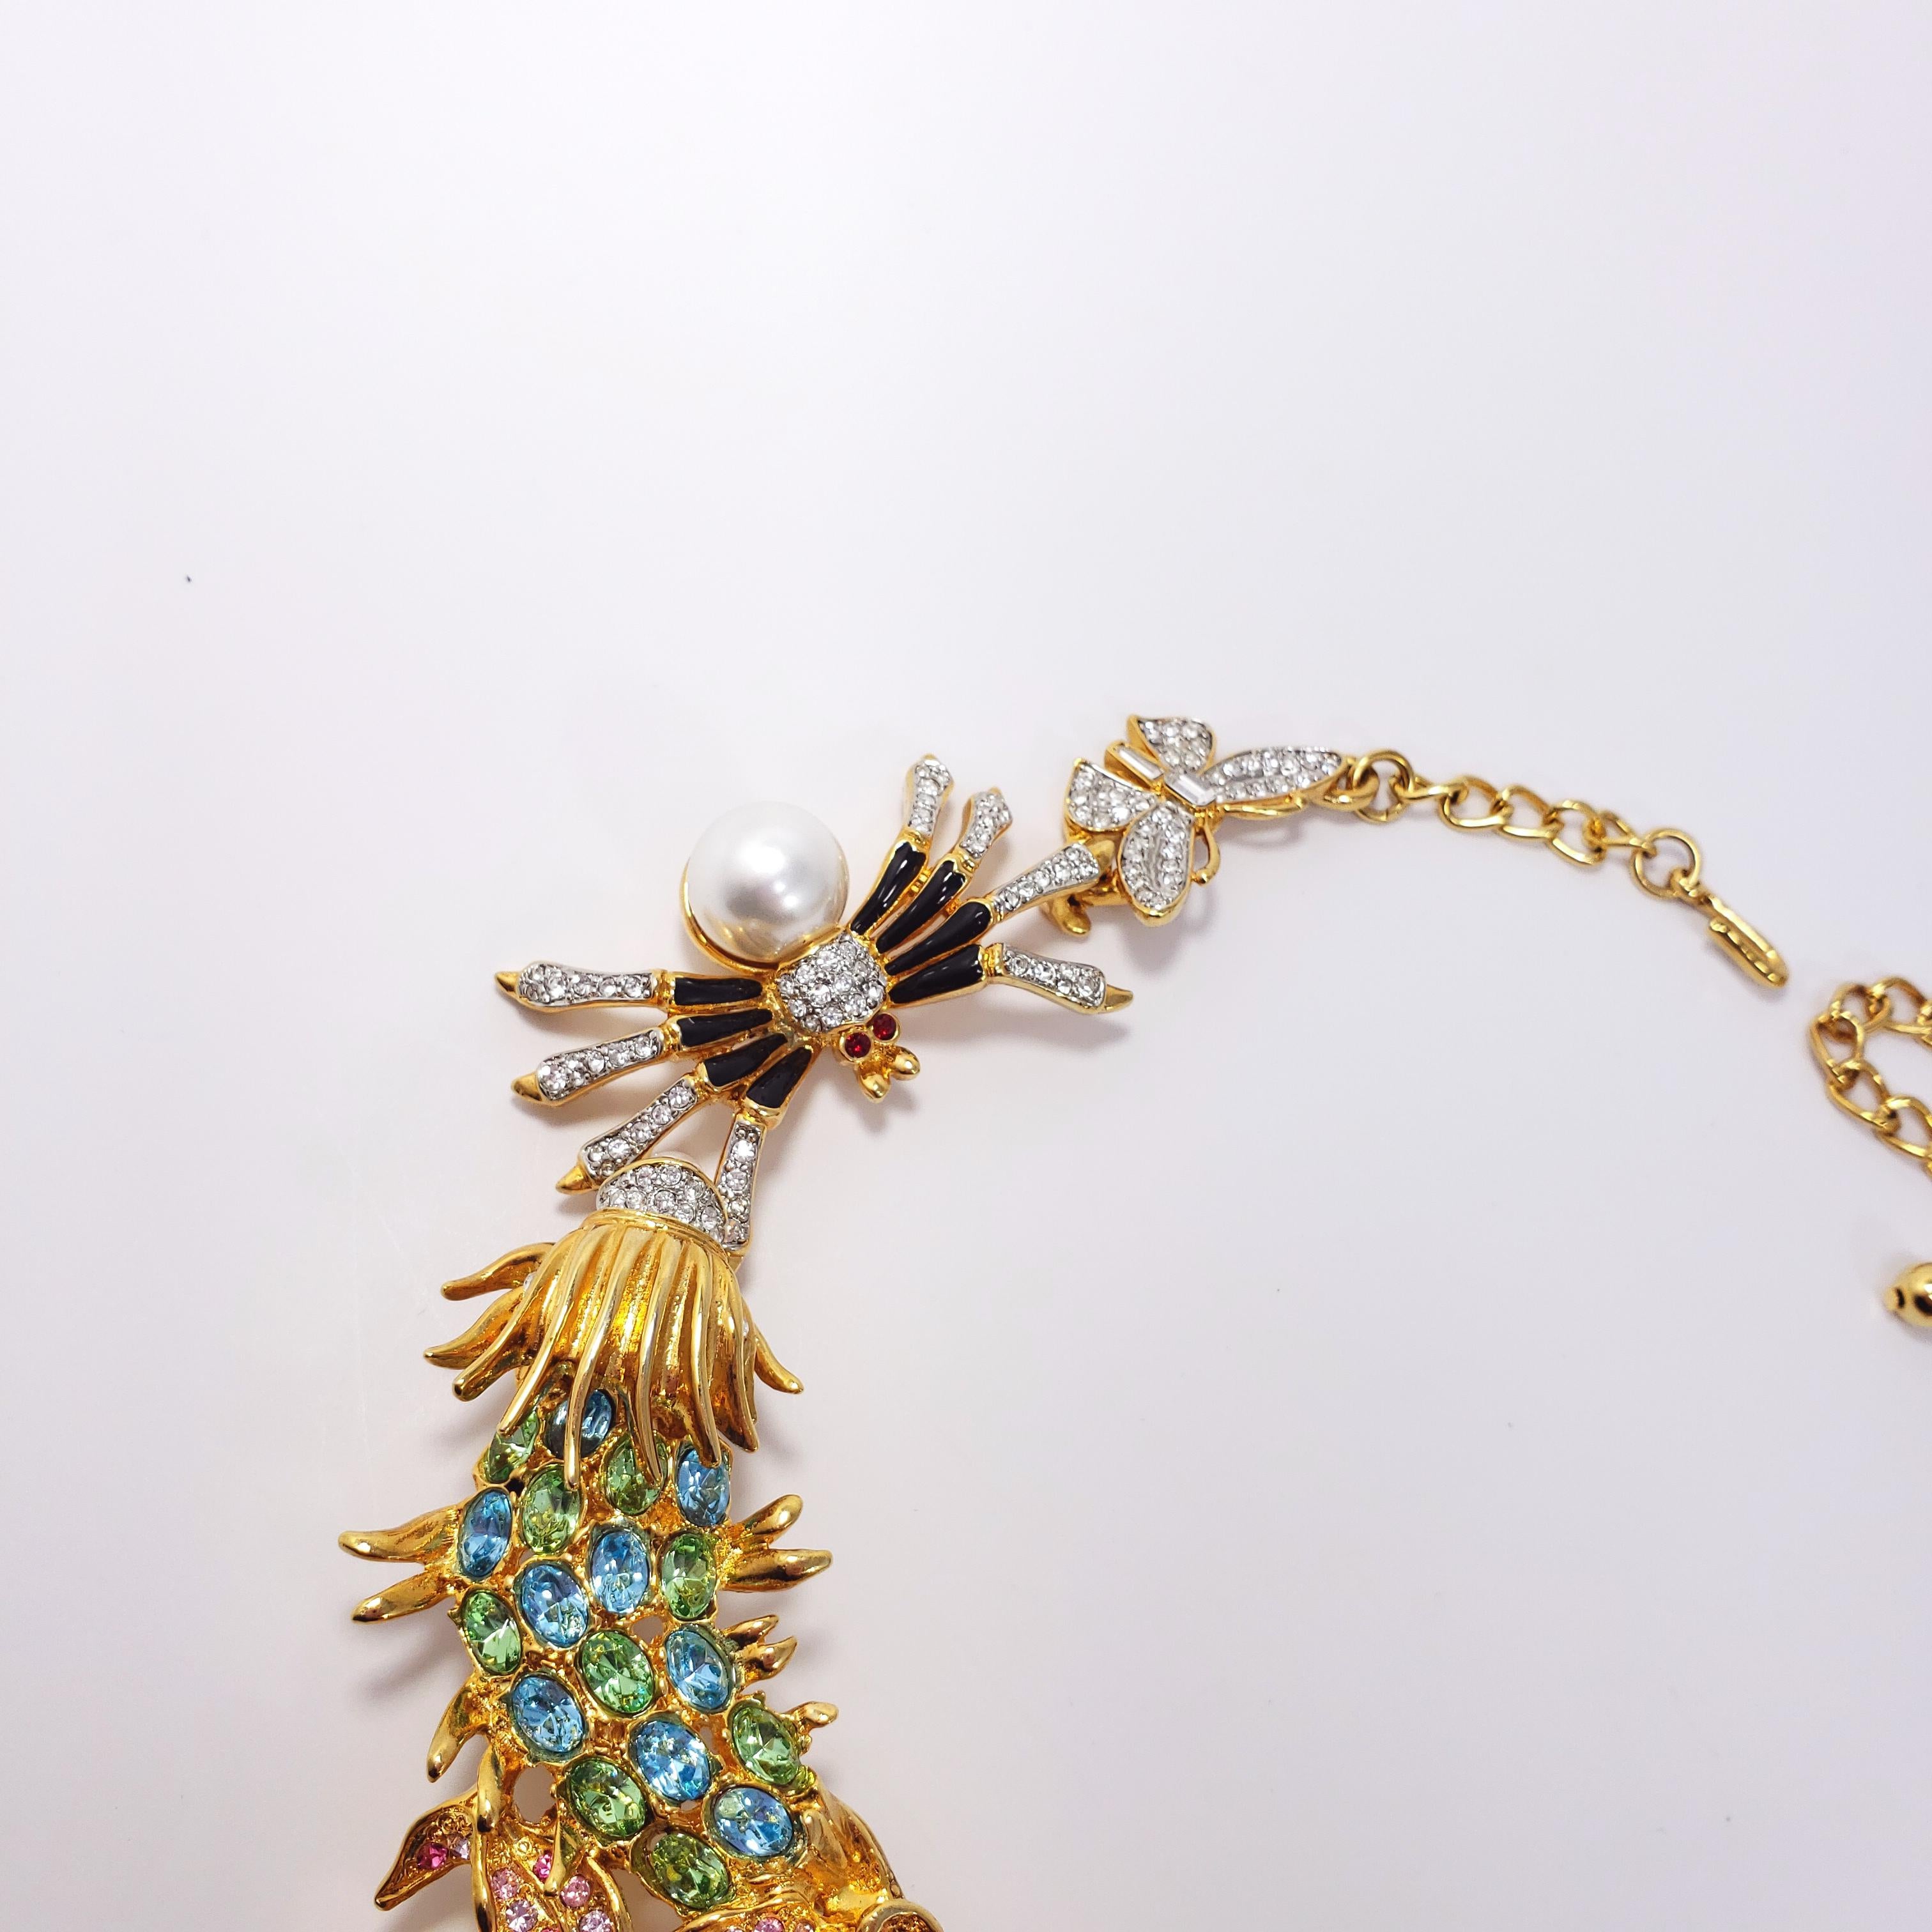 Kenneth Jay Lane Ornate Colorful Crystal Kaleidoscope Collar Necklace in Gold In New Condition For Sale In Milford, DE